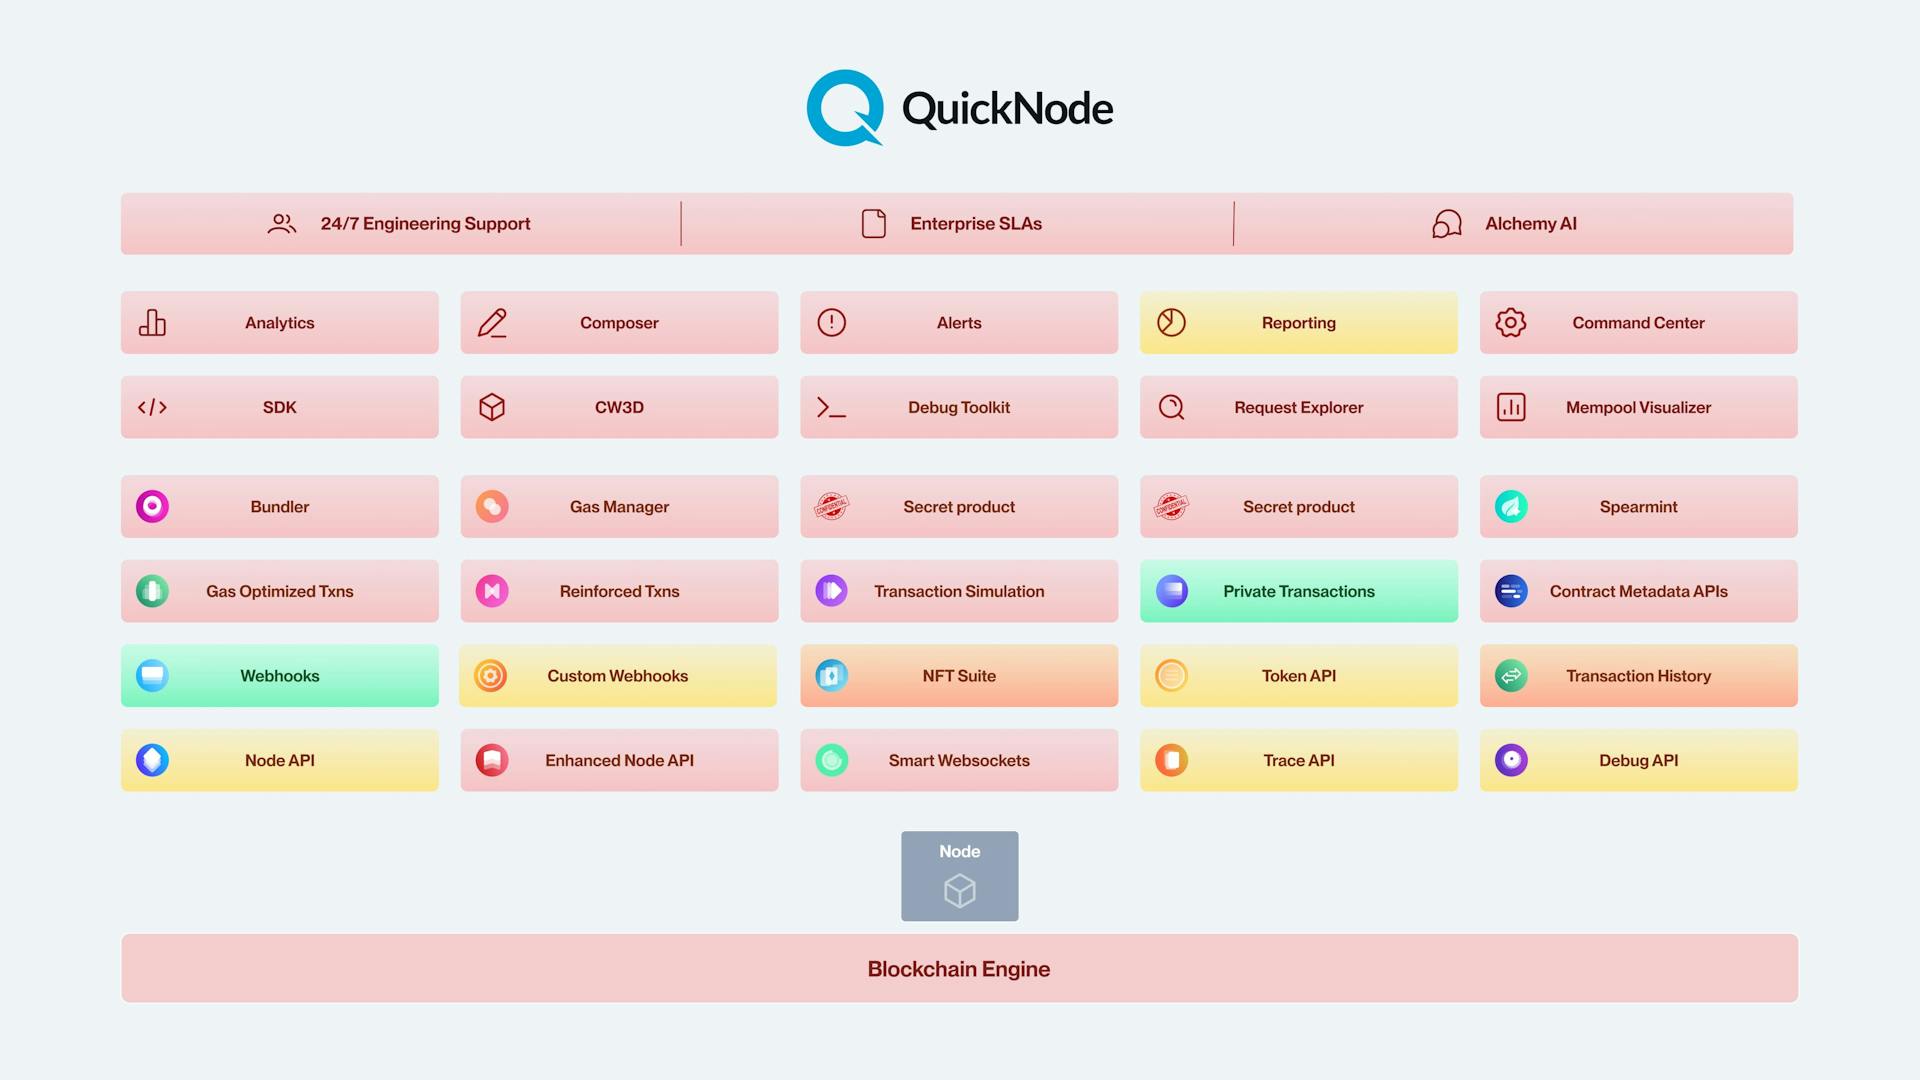 Quicknode is missing the products in red.